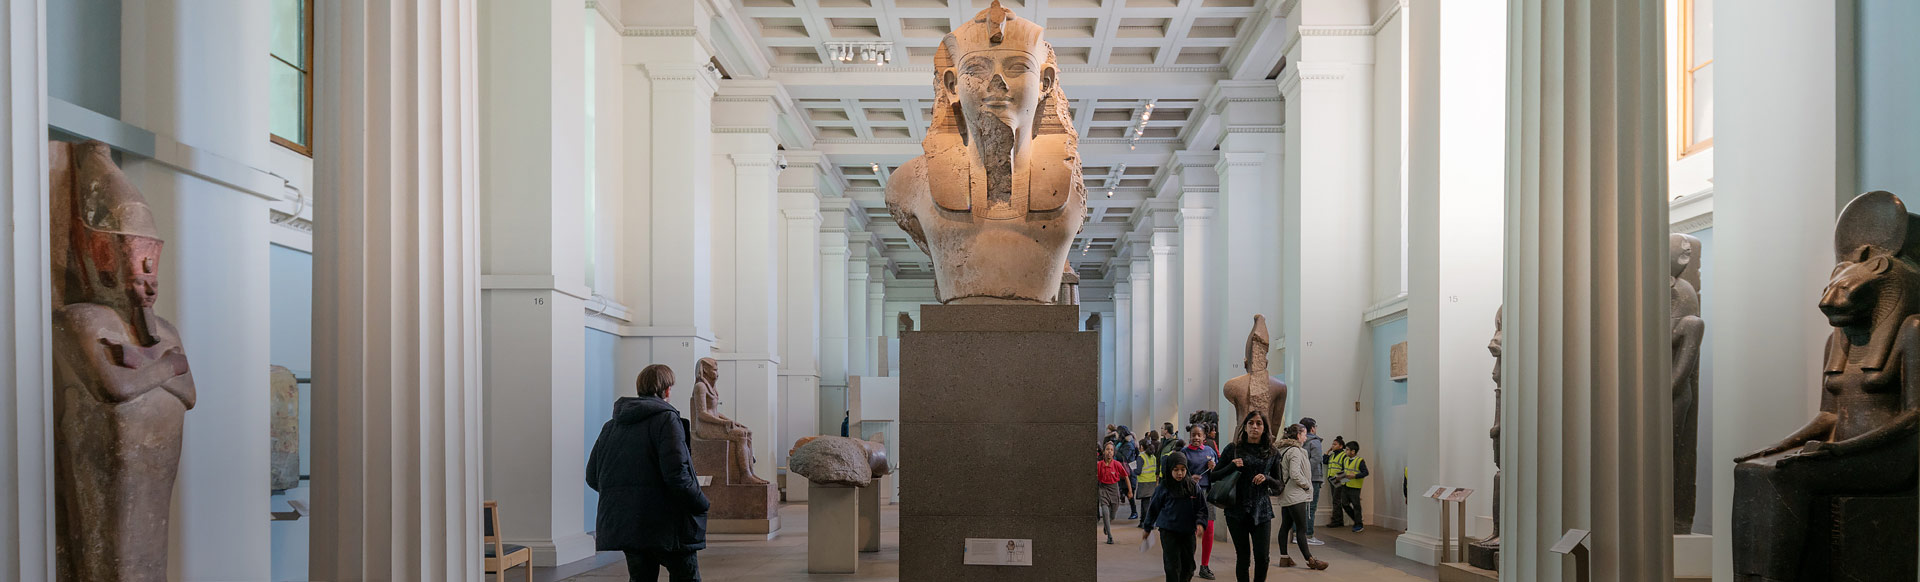 interior of the British Museum'S Egyptian Hall with Egyptian statues and museum visitors. © London and Partners/Jon Reid